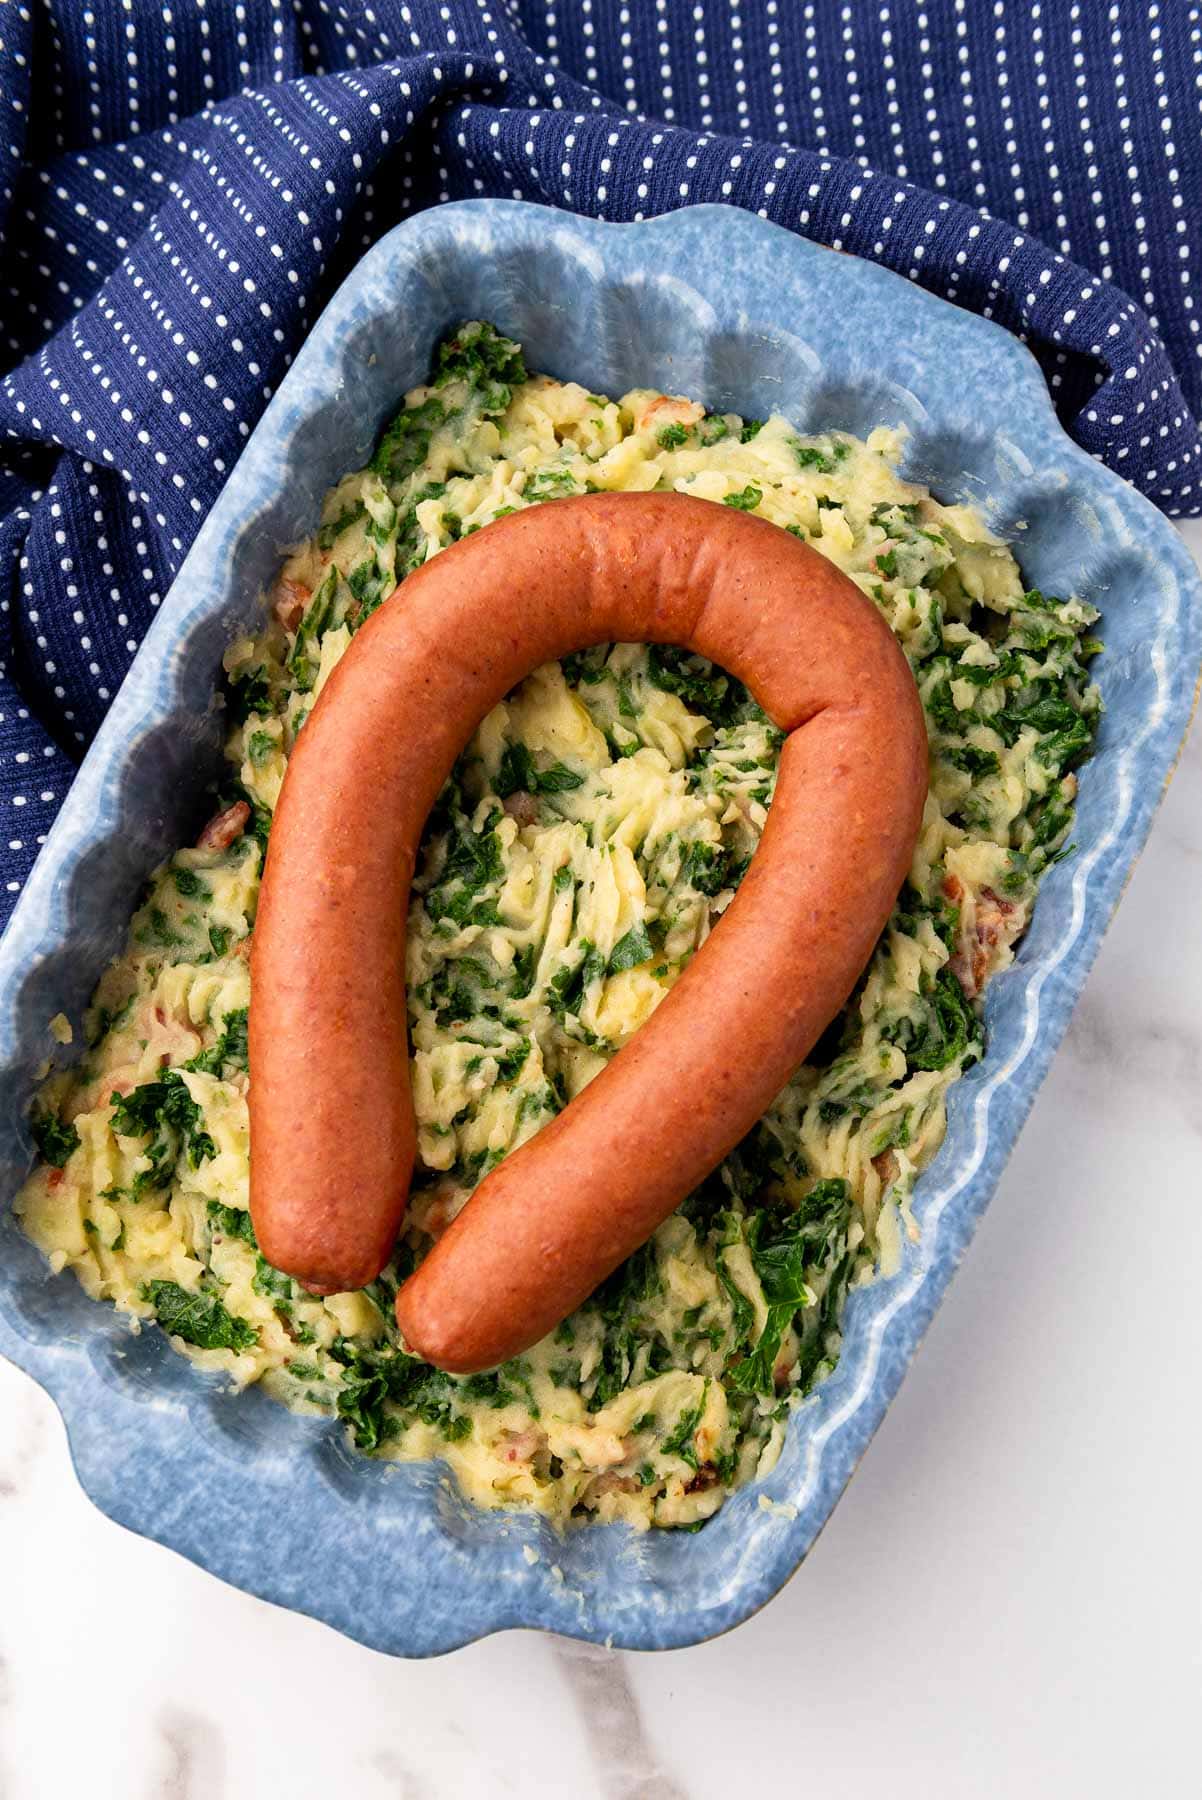 large smoked sausage sitting on top of blue baking dish filled with mashed potatoes with bacon and kale.